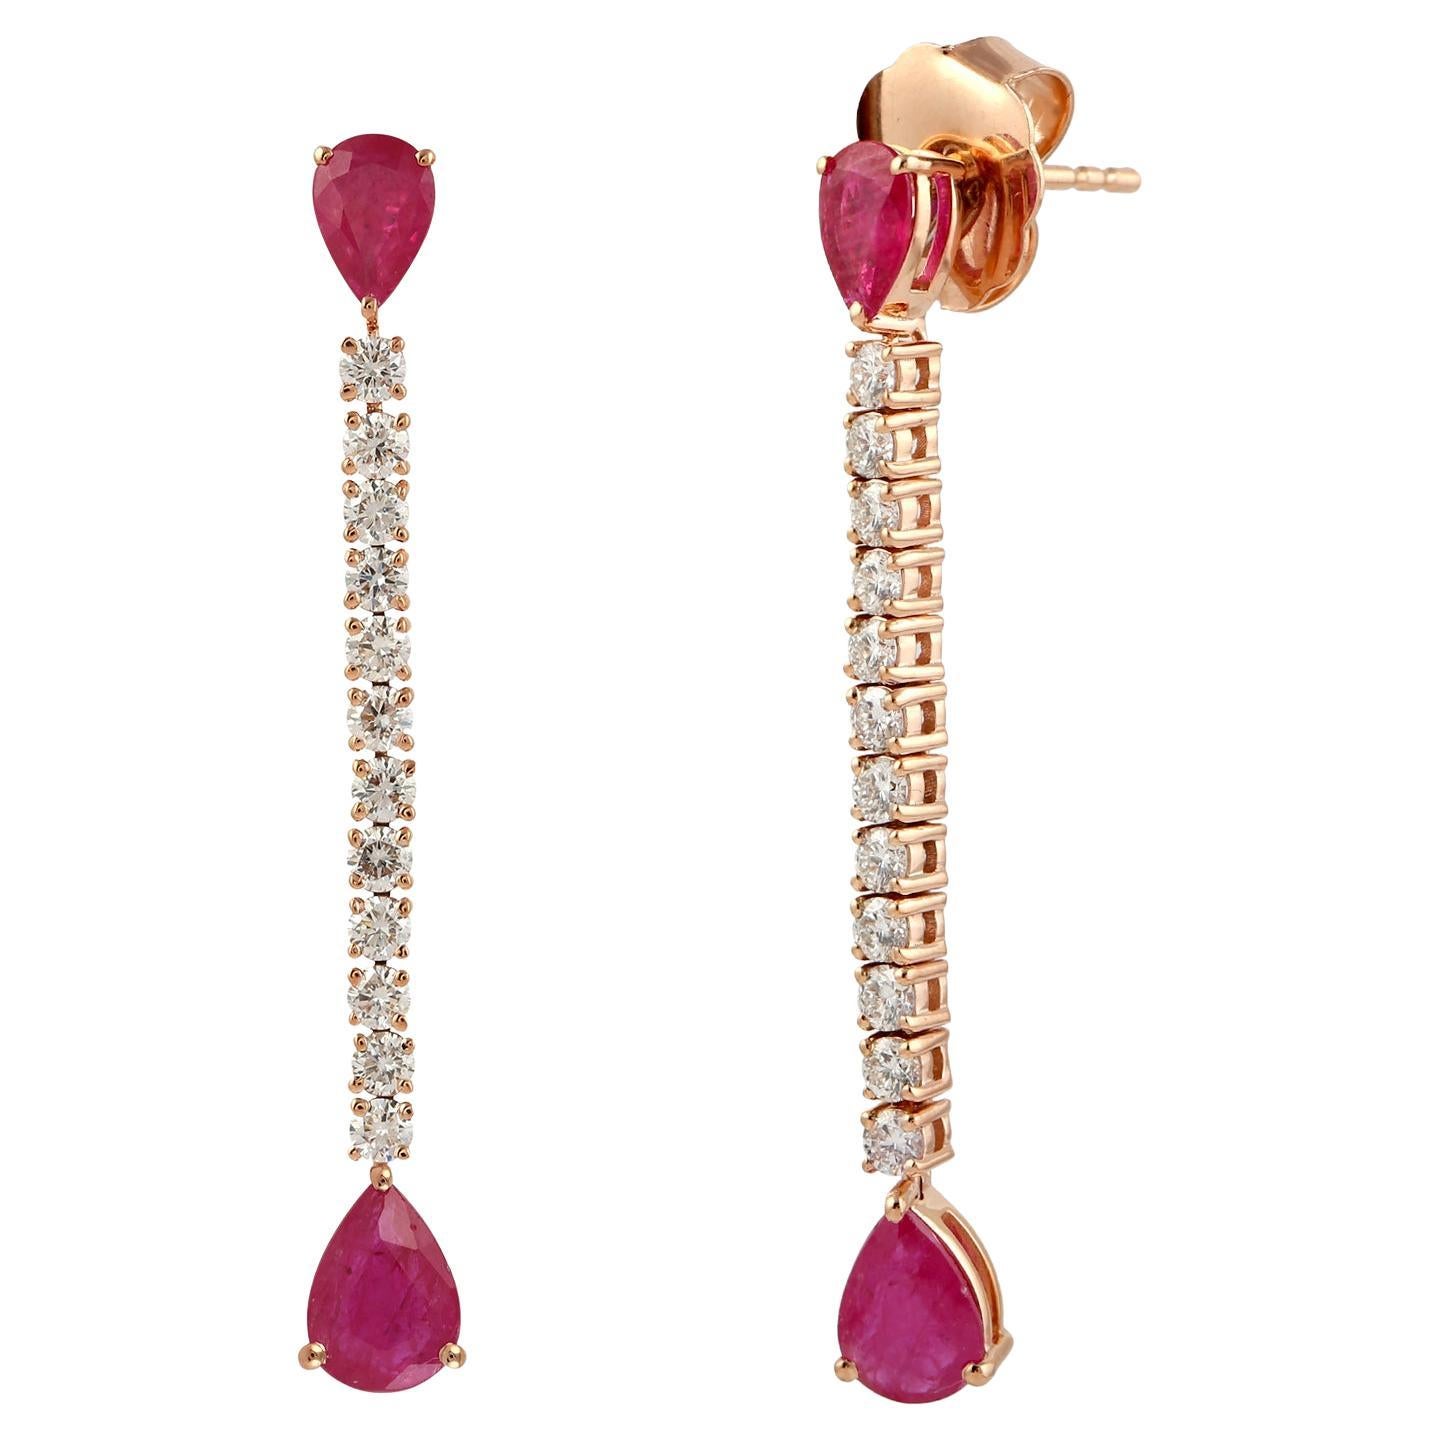 Pear Shaped Ruby Chain Earrings With Diamonds Made In 18k Gold